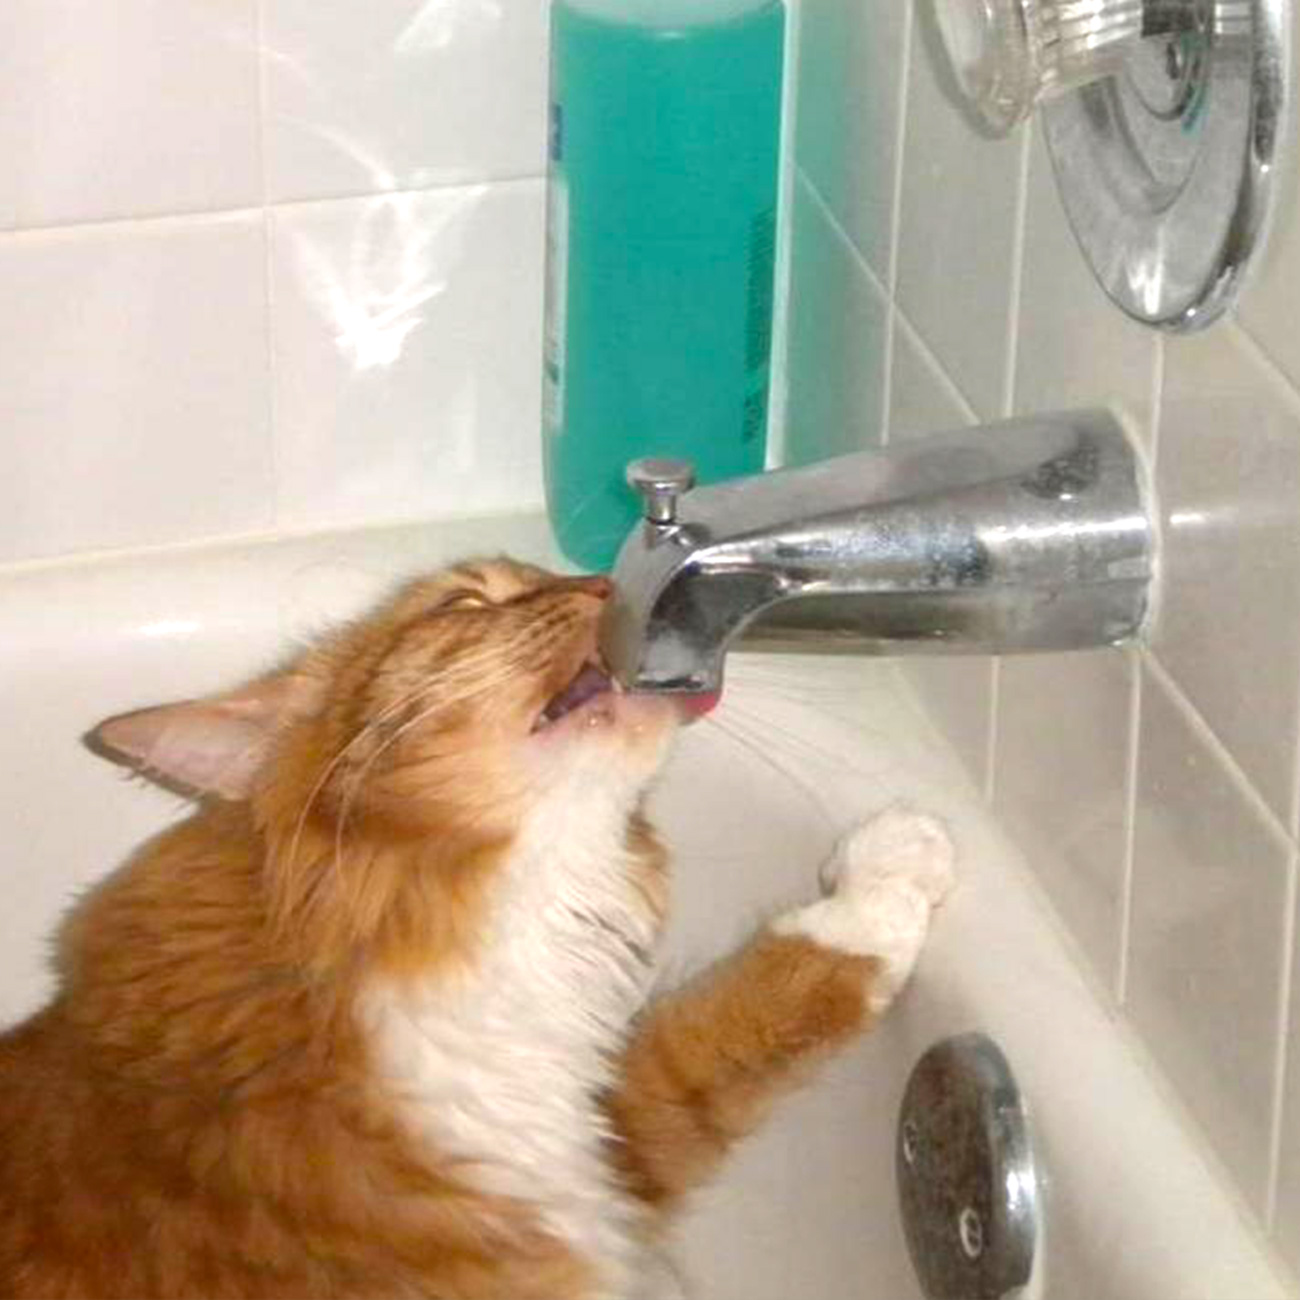 Meet mr Kitty Hes one of our favorite pet pals hes getting a drink from the bathtub spigot